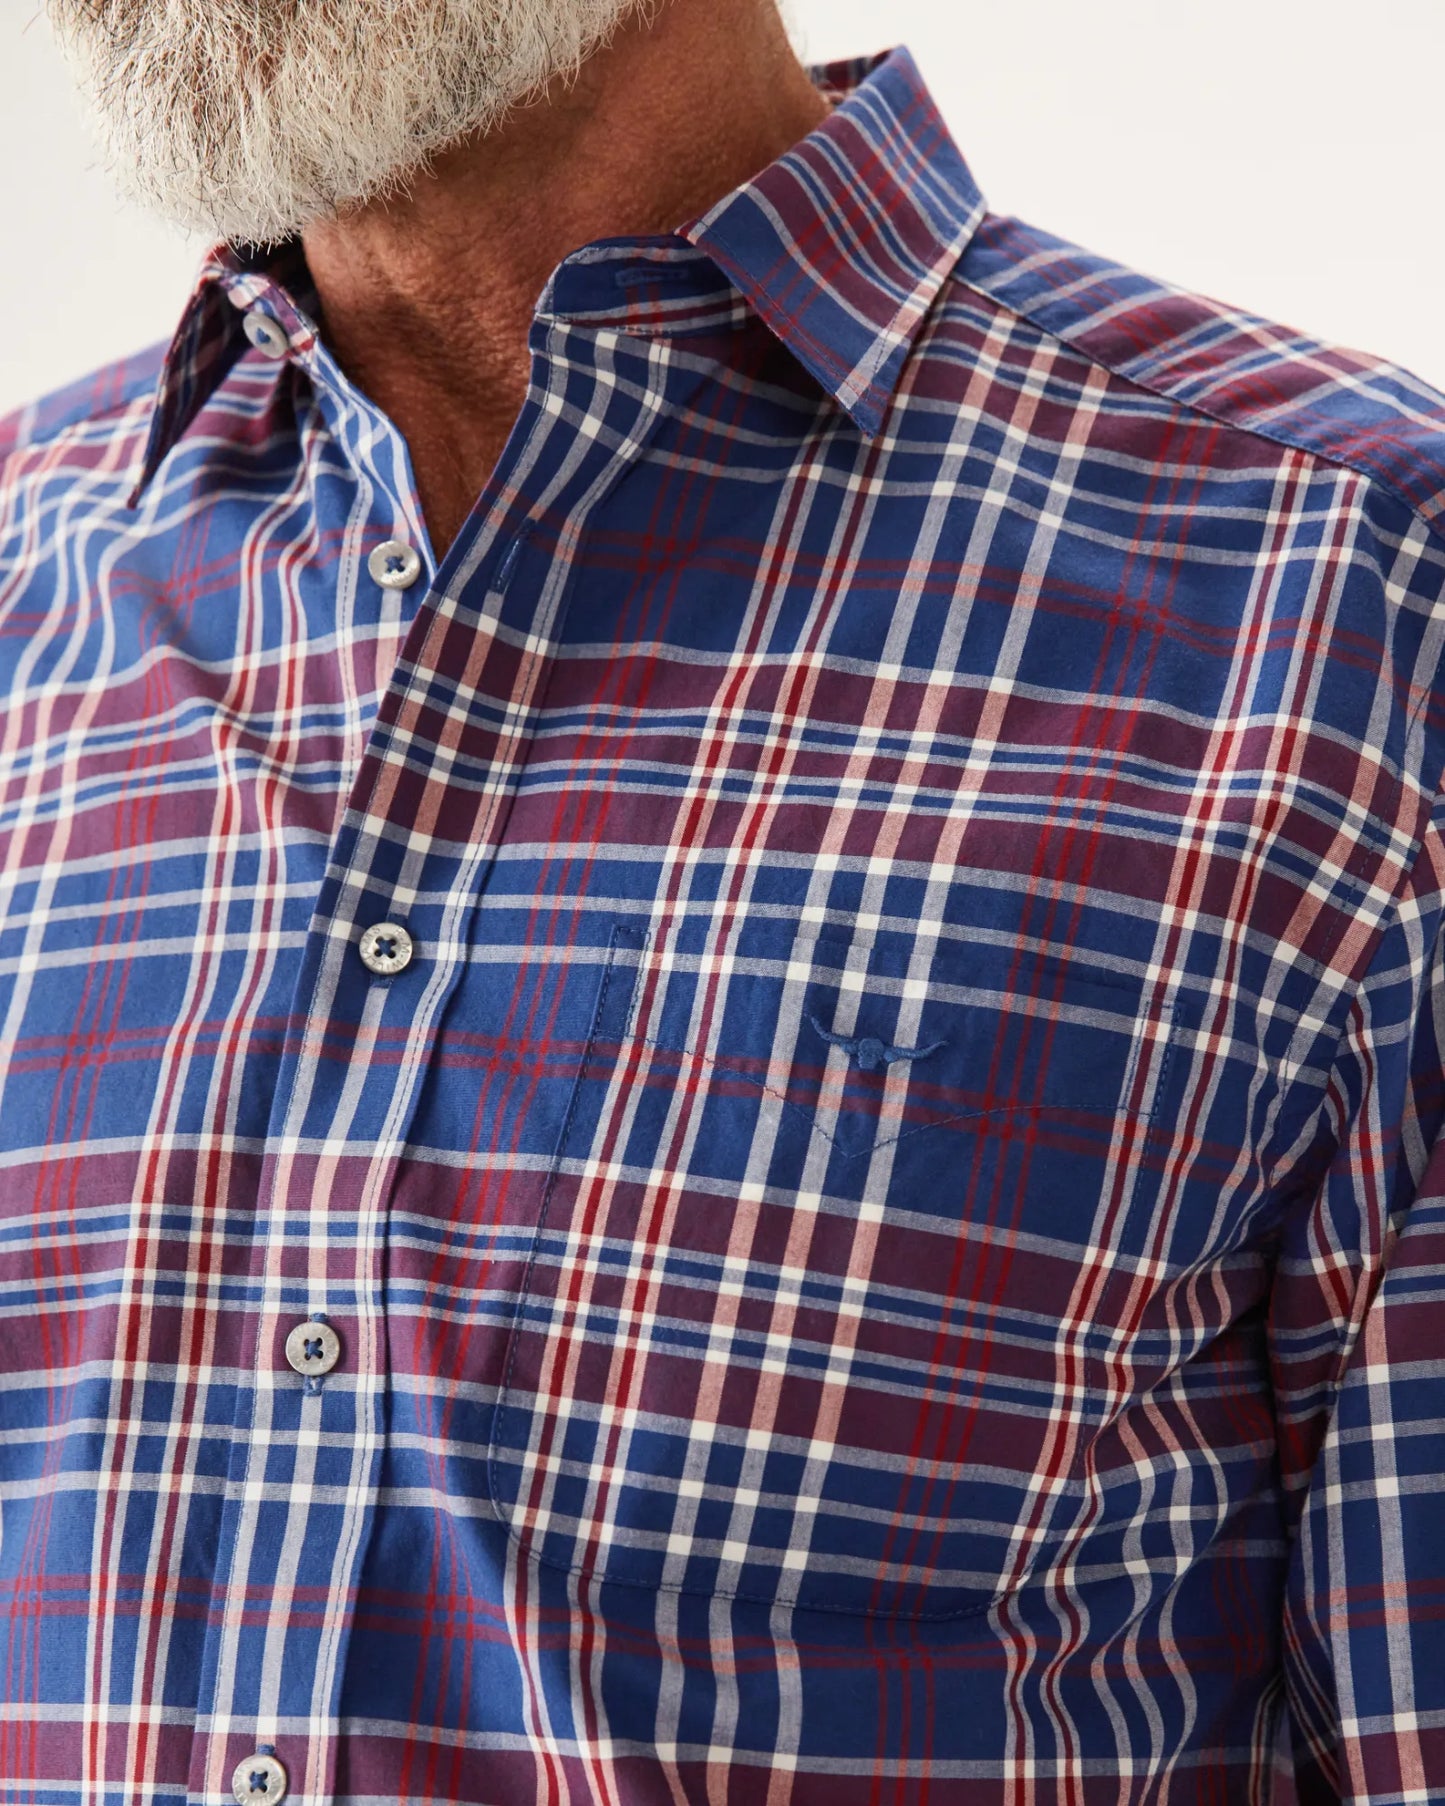 Collins Shirt - Blue/White/Red